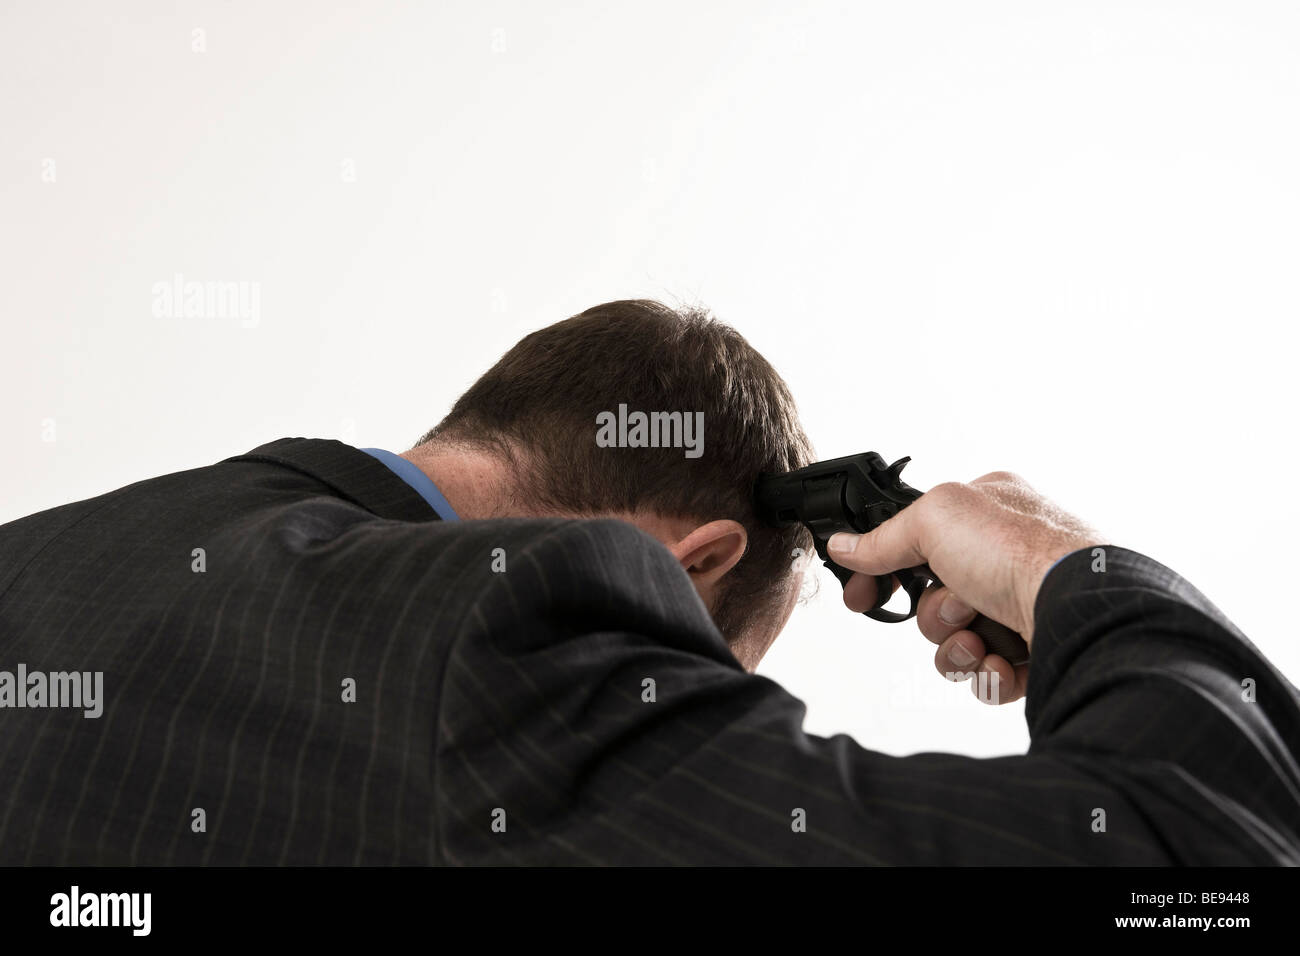 Man wearing a suit, holding gun to his head Stock Photo